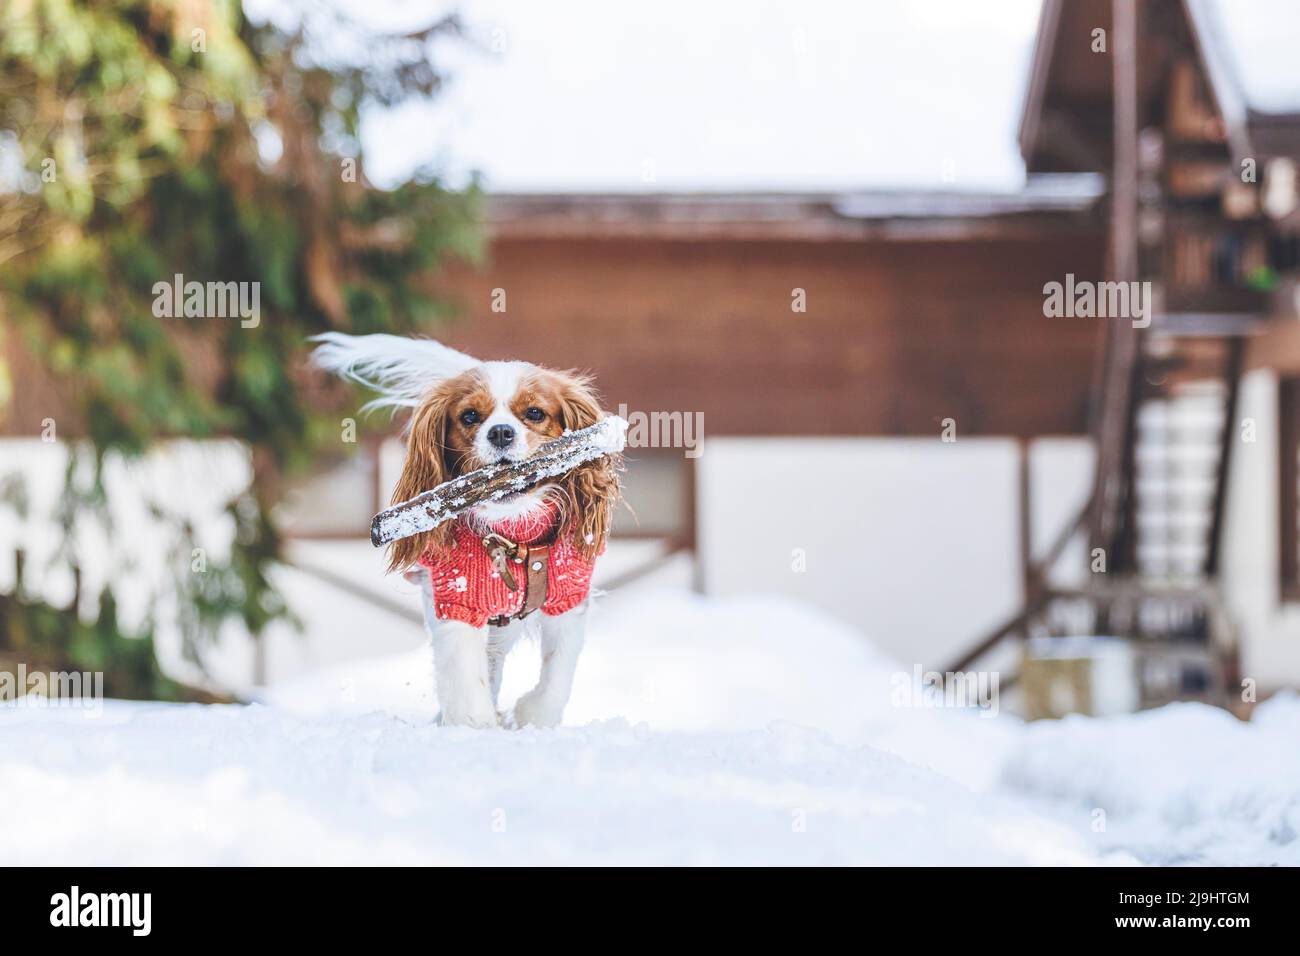 Dog with stick in mouth walking on snow Stock Photo